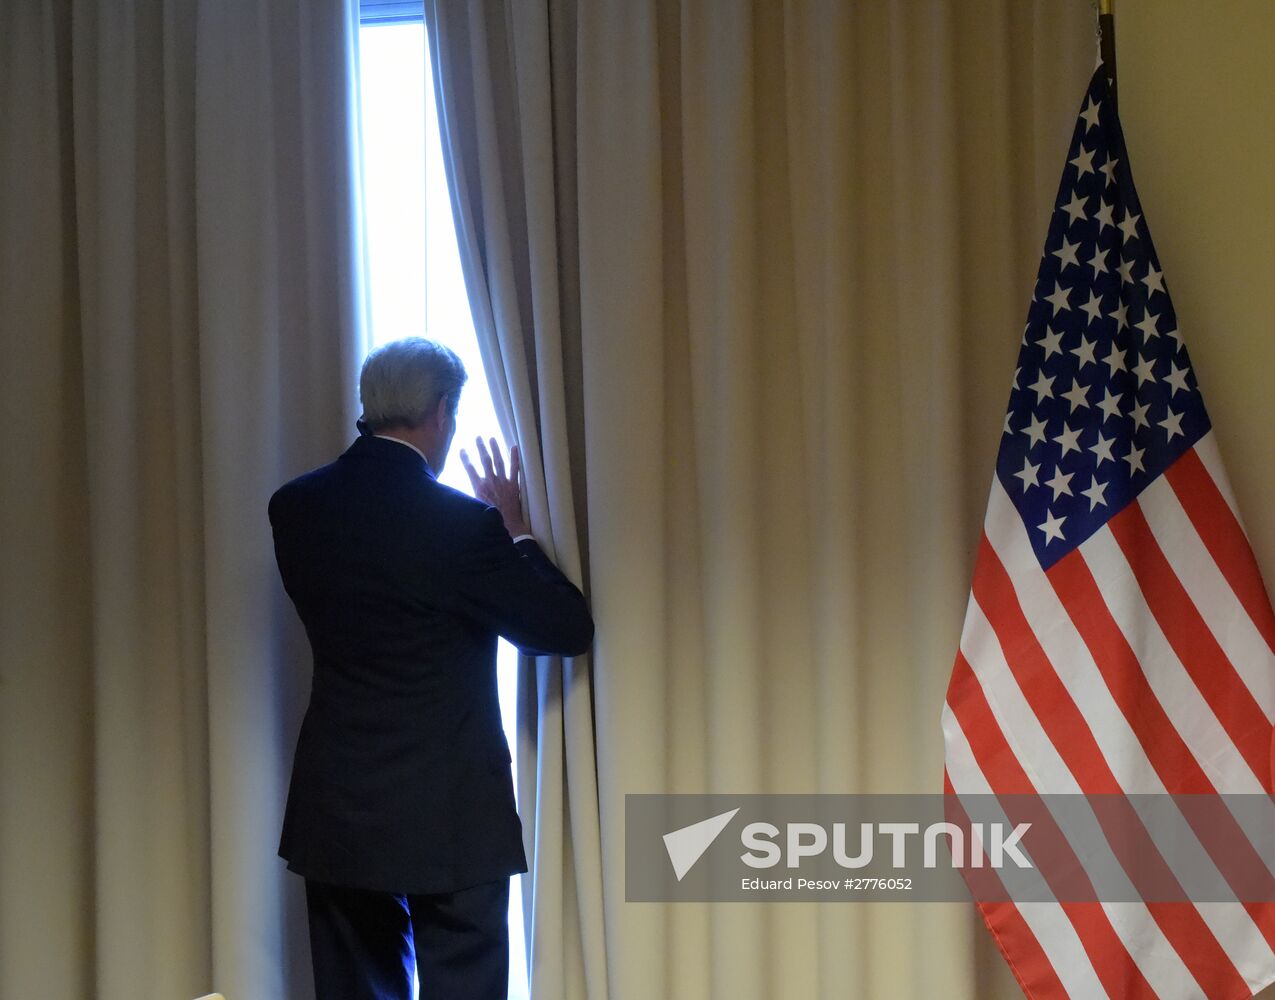 Russian Foreign Affairs' Minister Sergei Lavrov's meeting with U.S. Secretary of State John Kerry